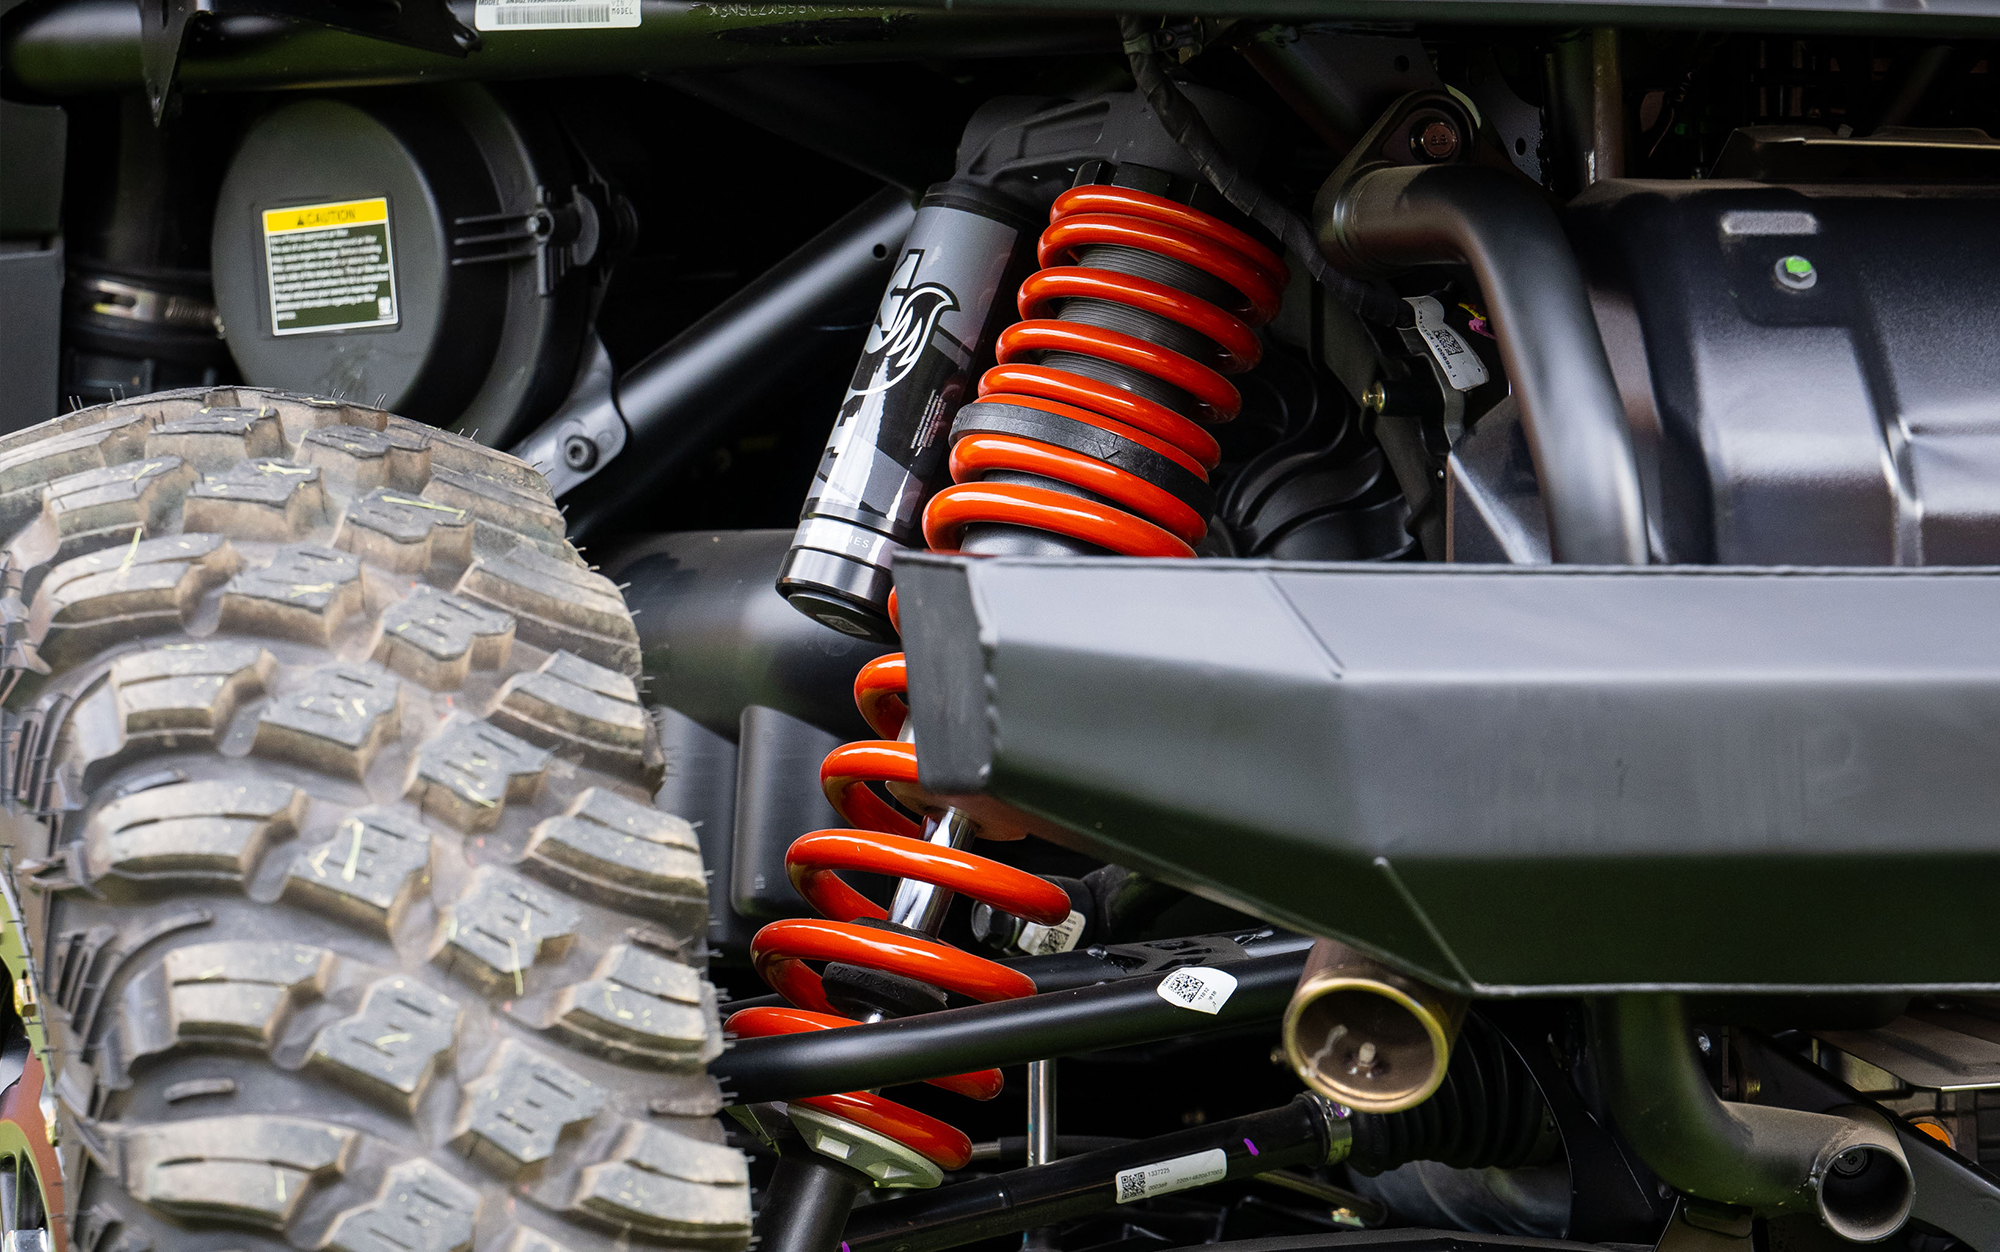 The newly developed shocks, suspension, wheels, and high-clearance make this a highly capable and comfortable SXS.